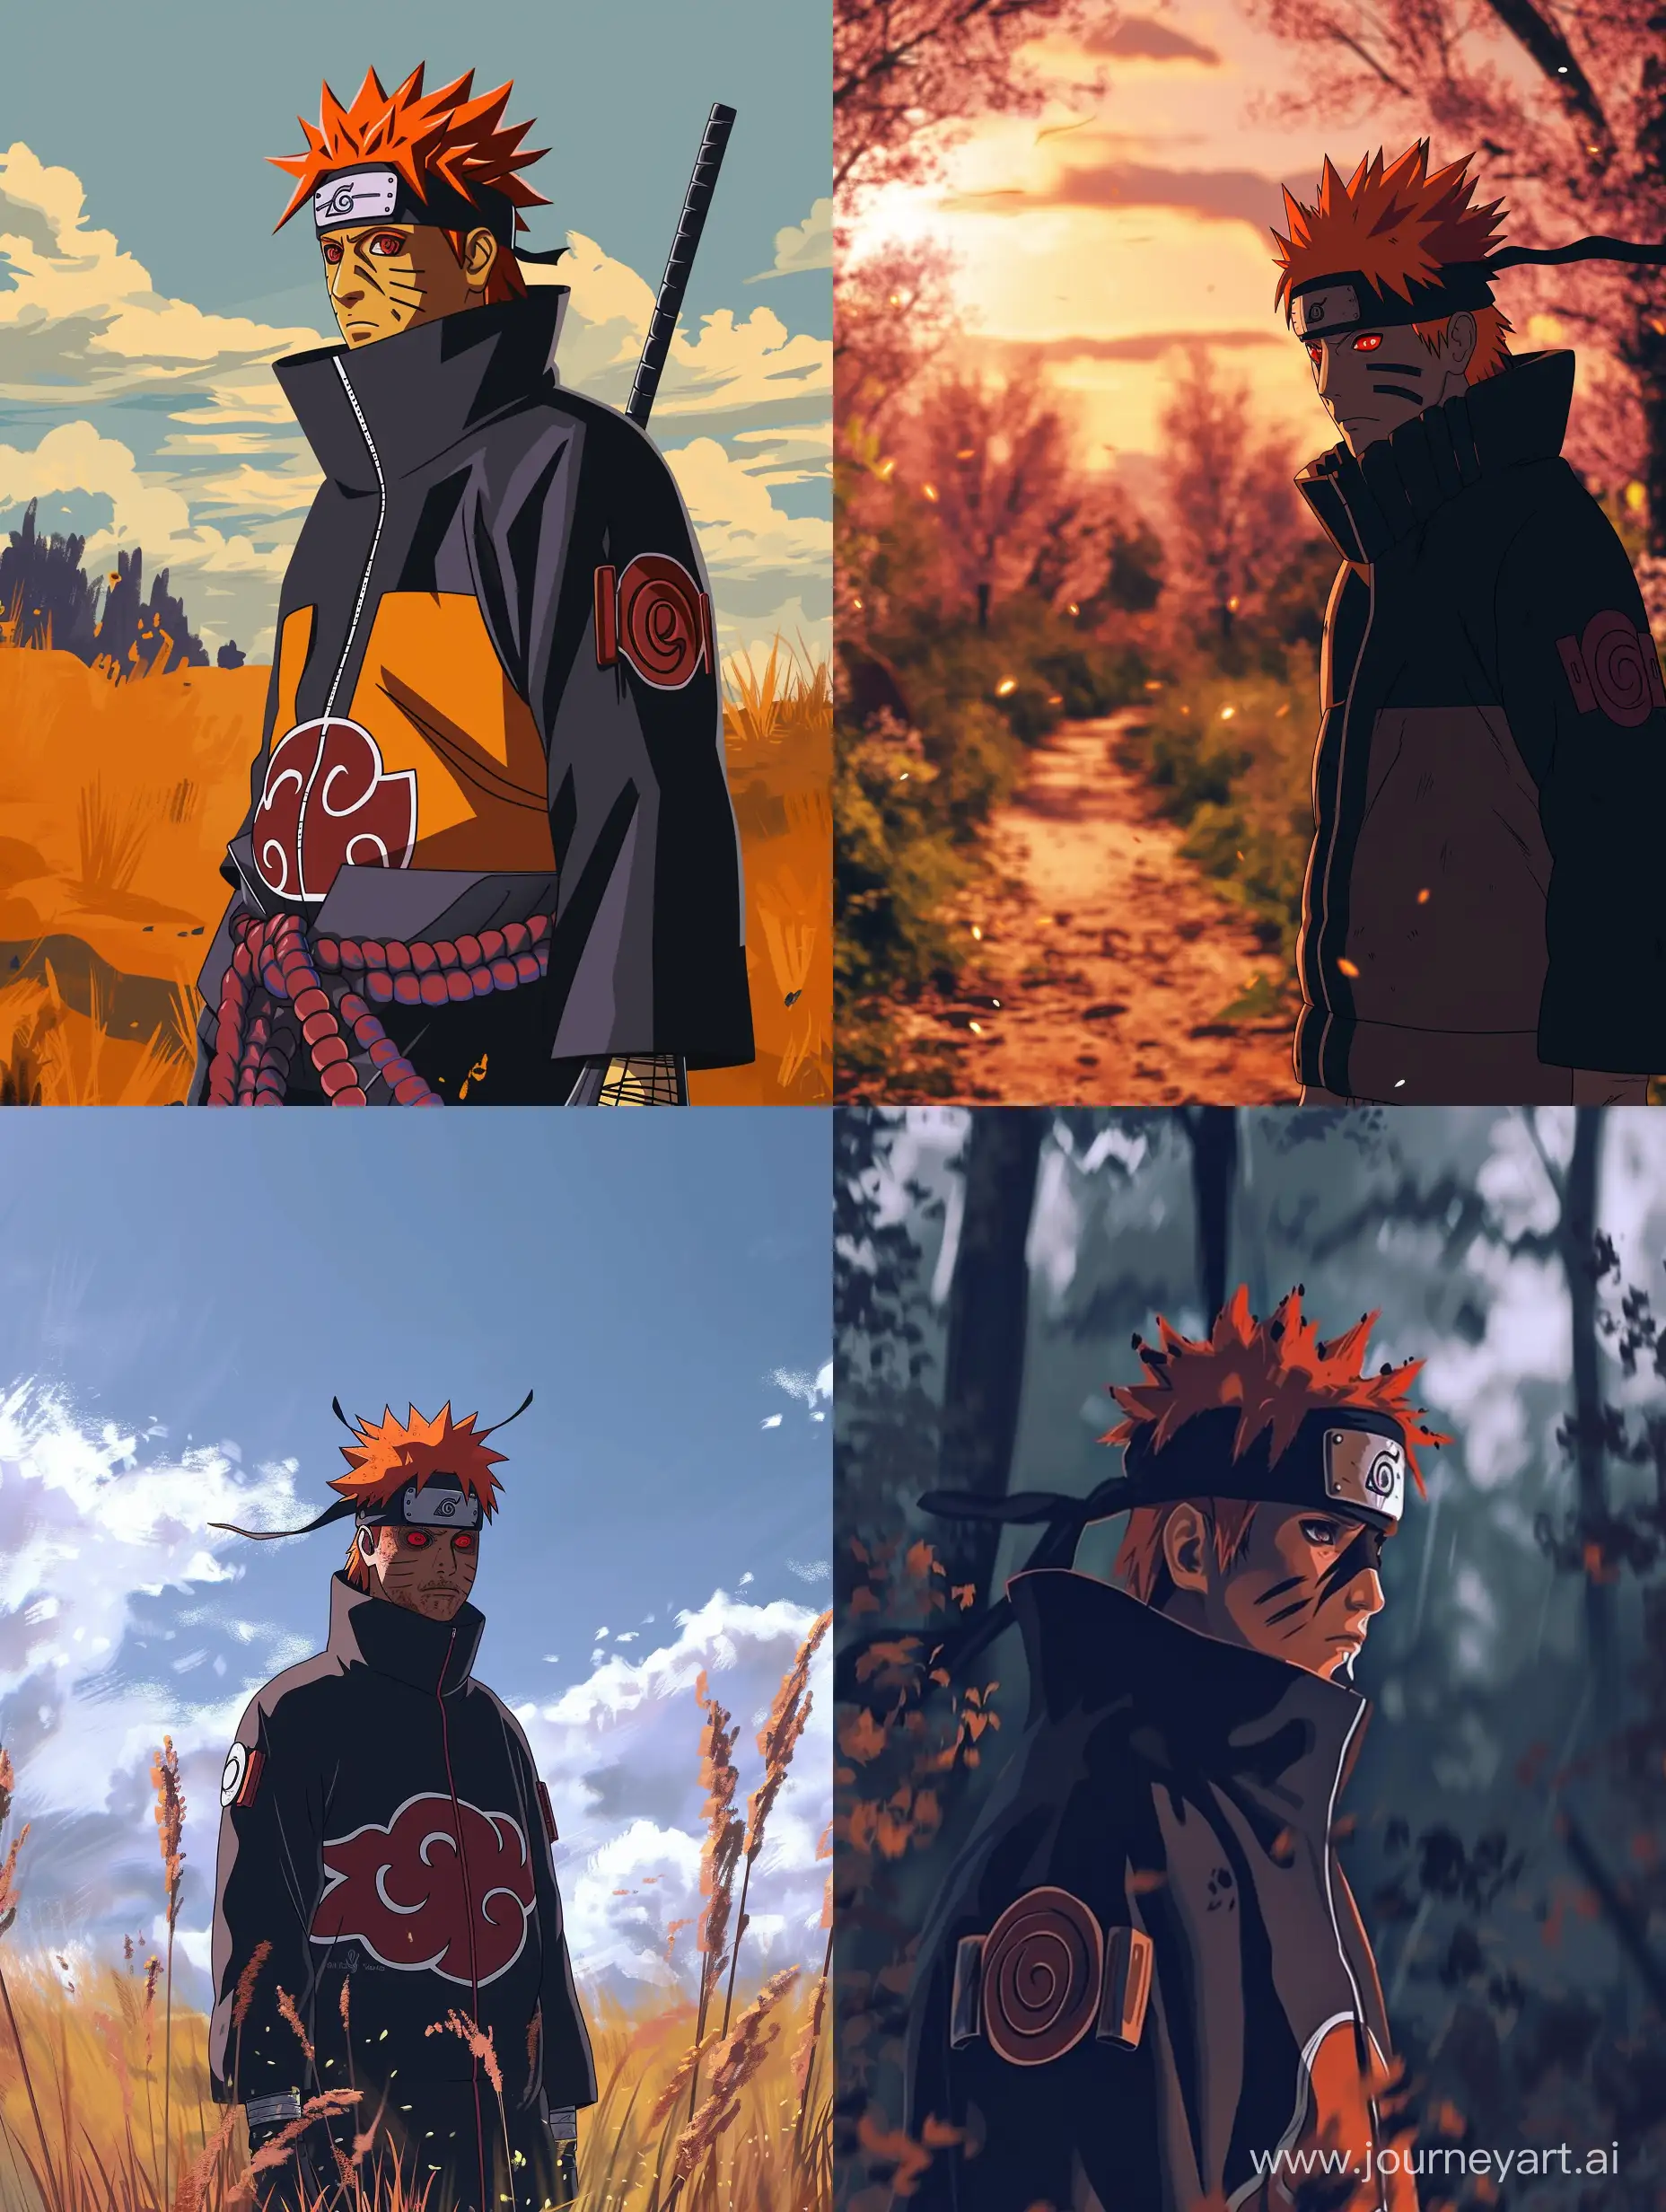 A picture of Pain from Naruto Shippuden inspired by Studio Ghibli Art Style